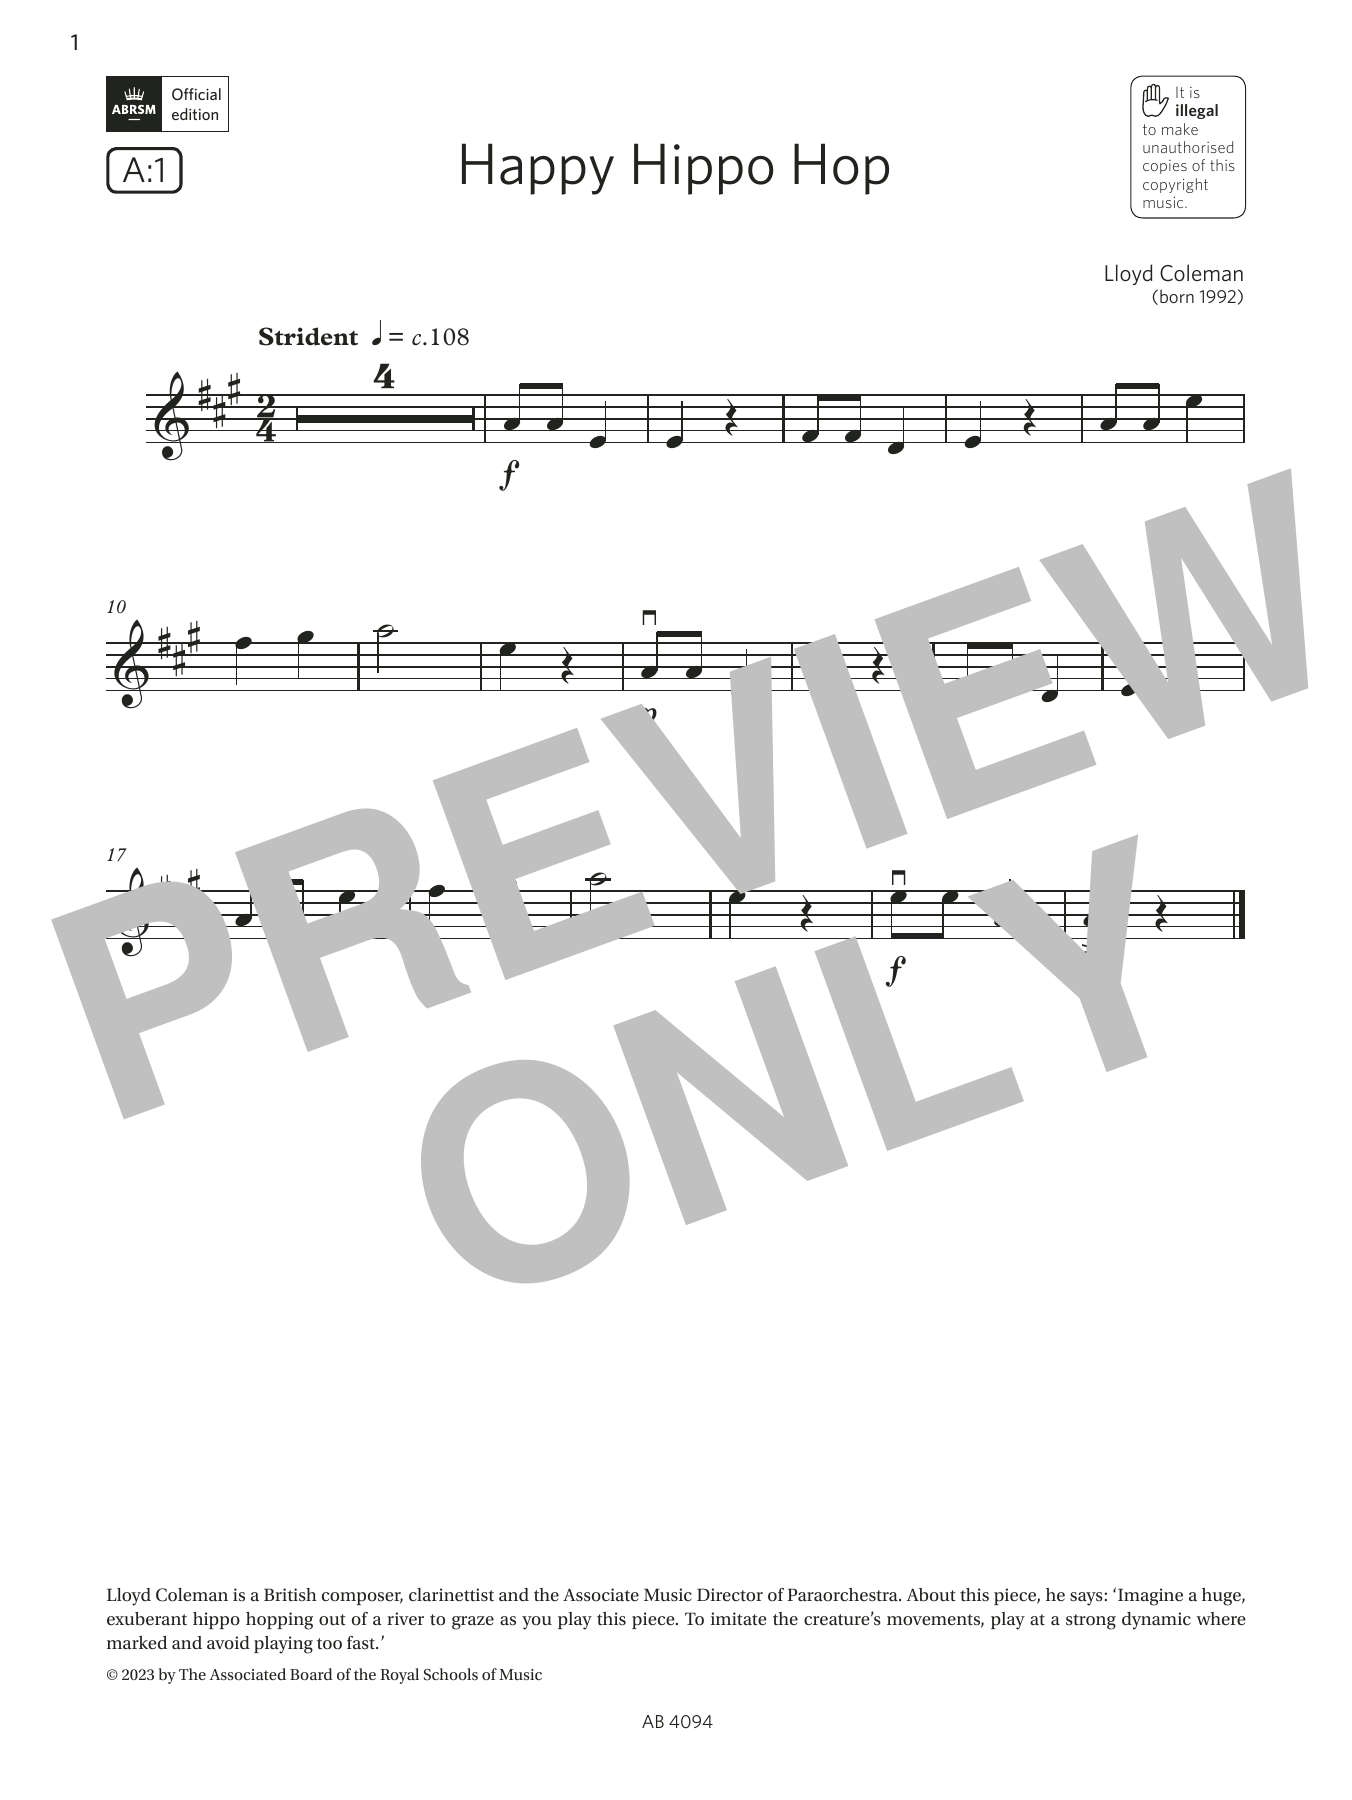 Download Lloyd Coleman Happy Hippo Hop (Grade Initial, A1, fro Sheet Music